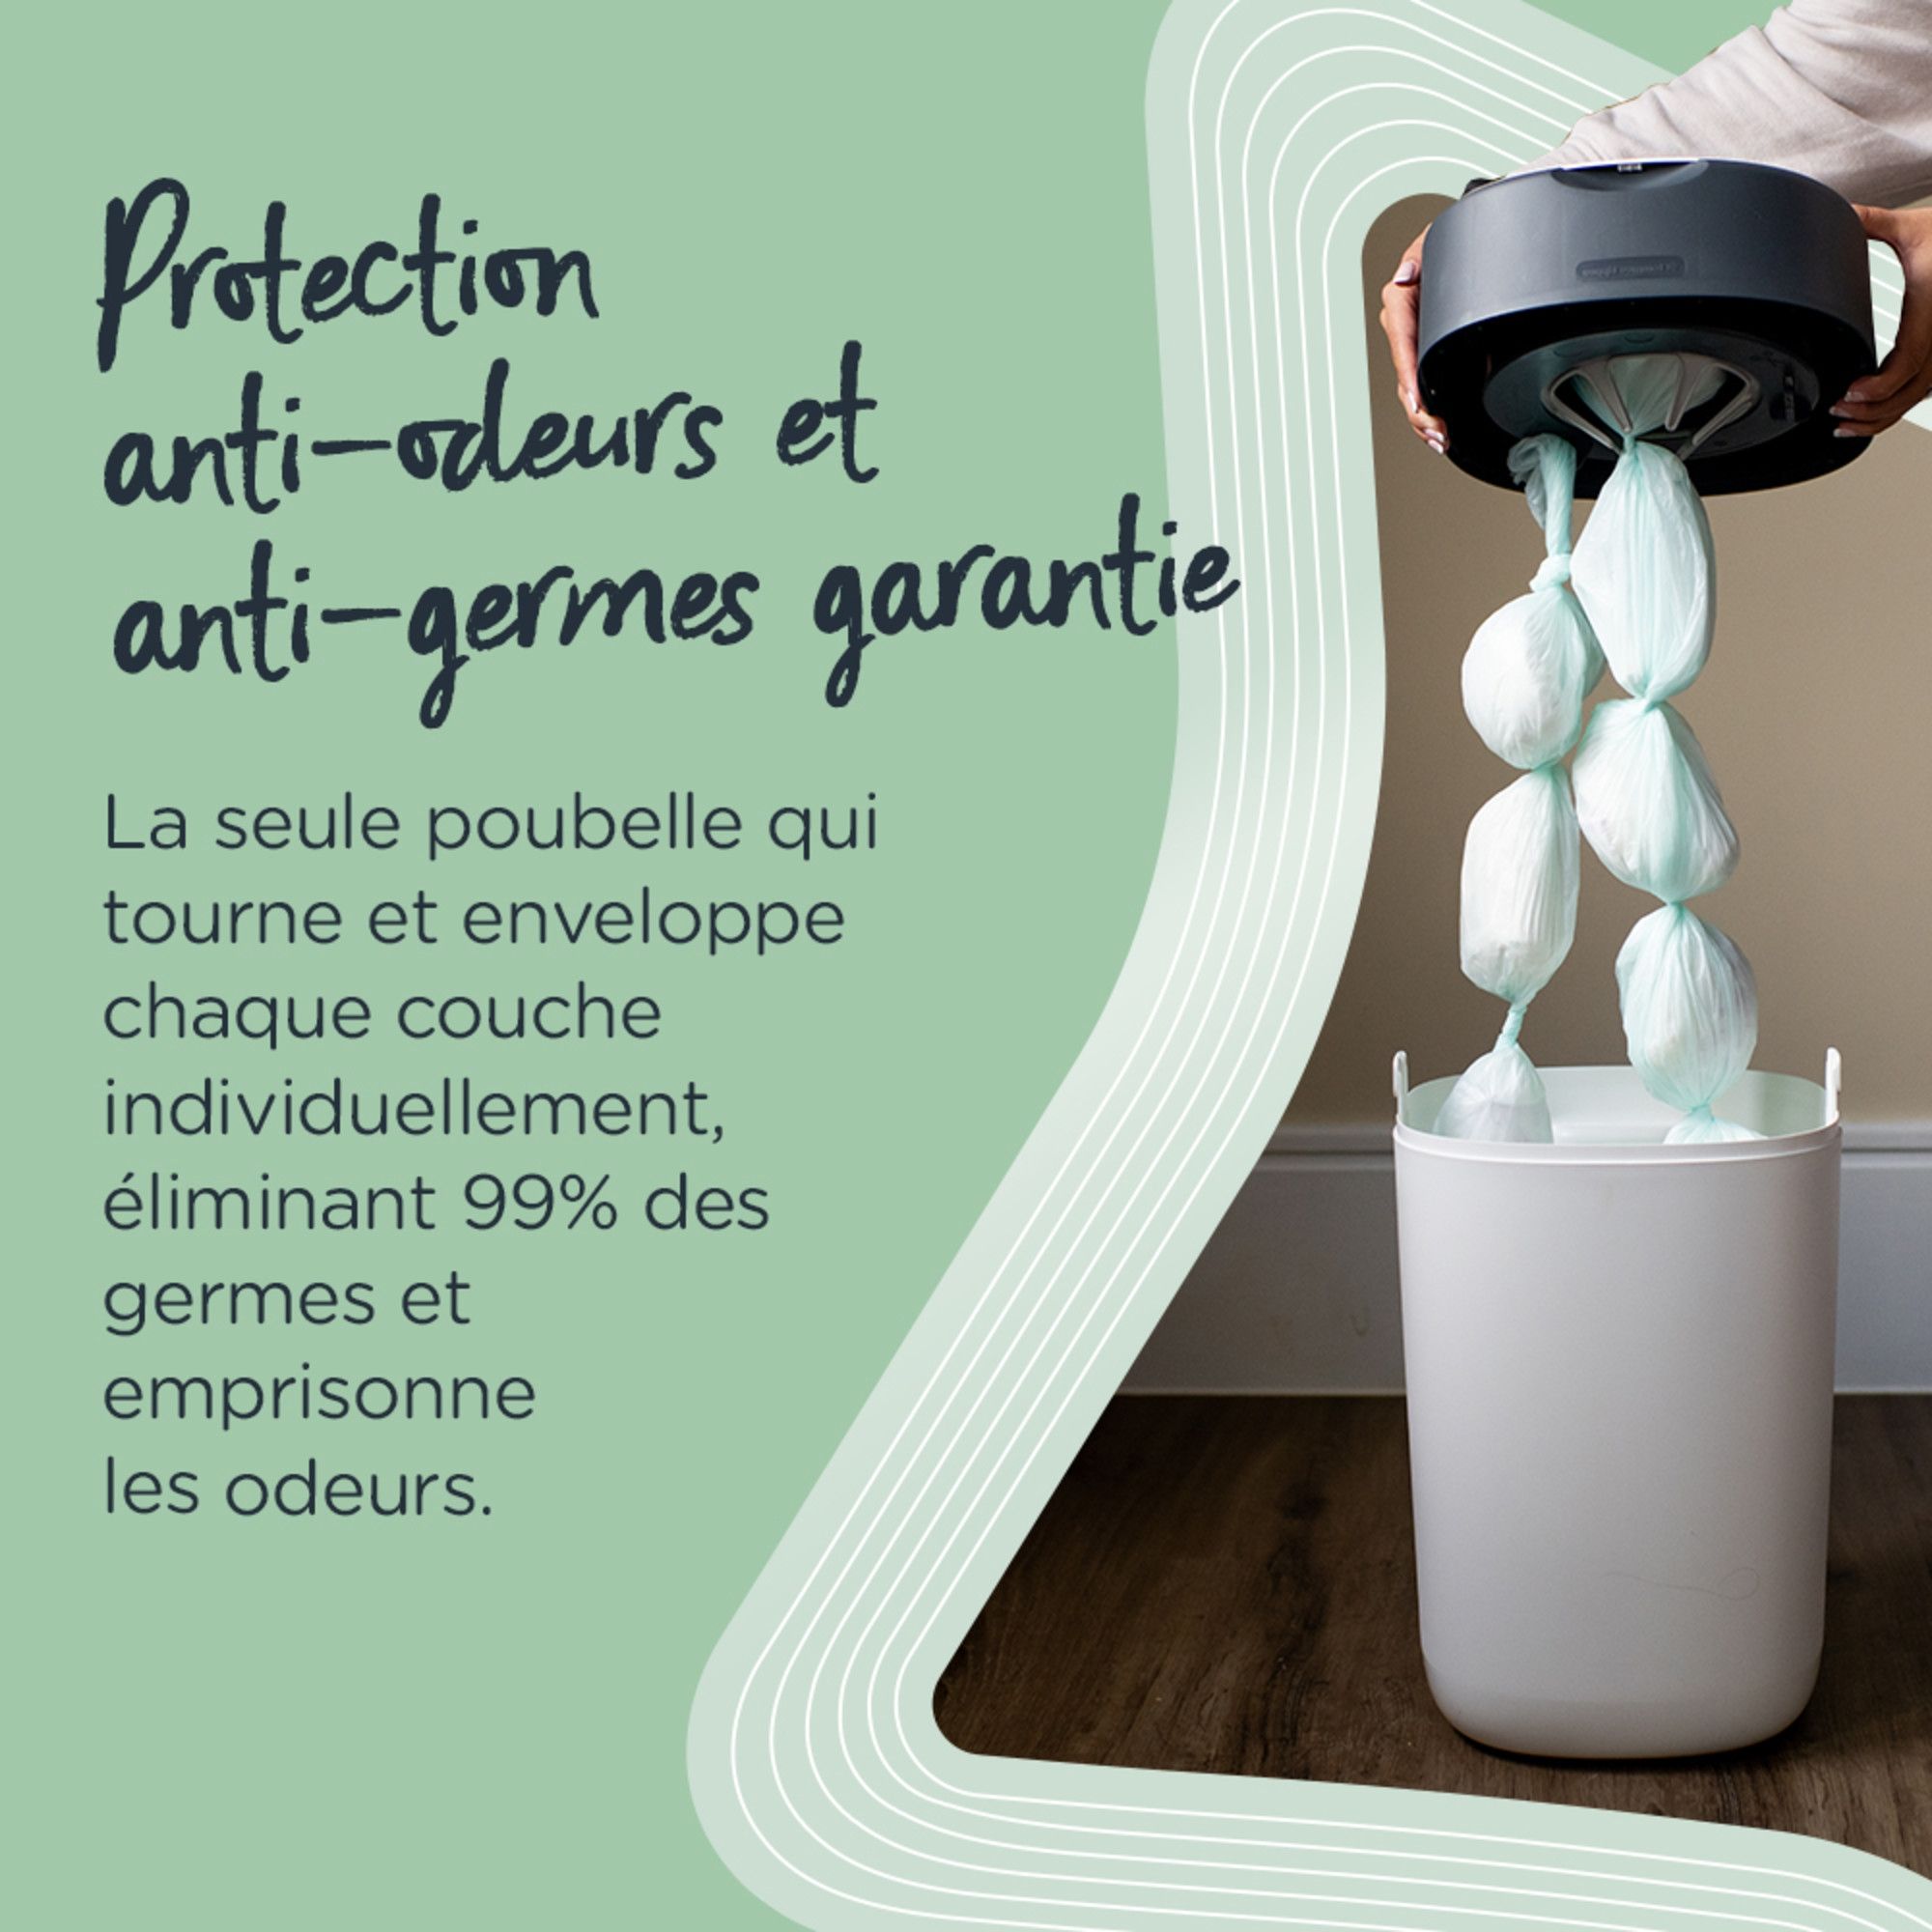 Tommee Tippee Poubelle à couches Twist & Click Advanced blanc, 4 recharges  Greenfilm